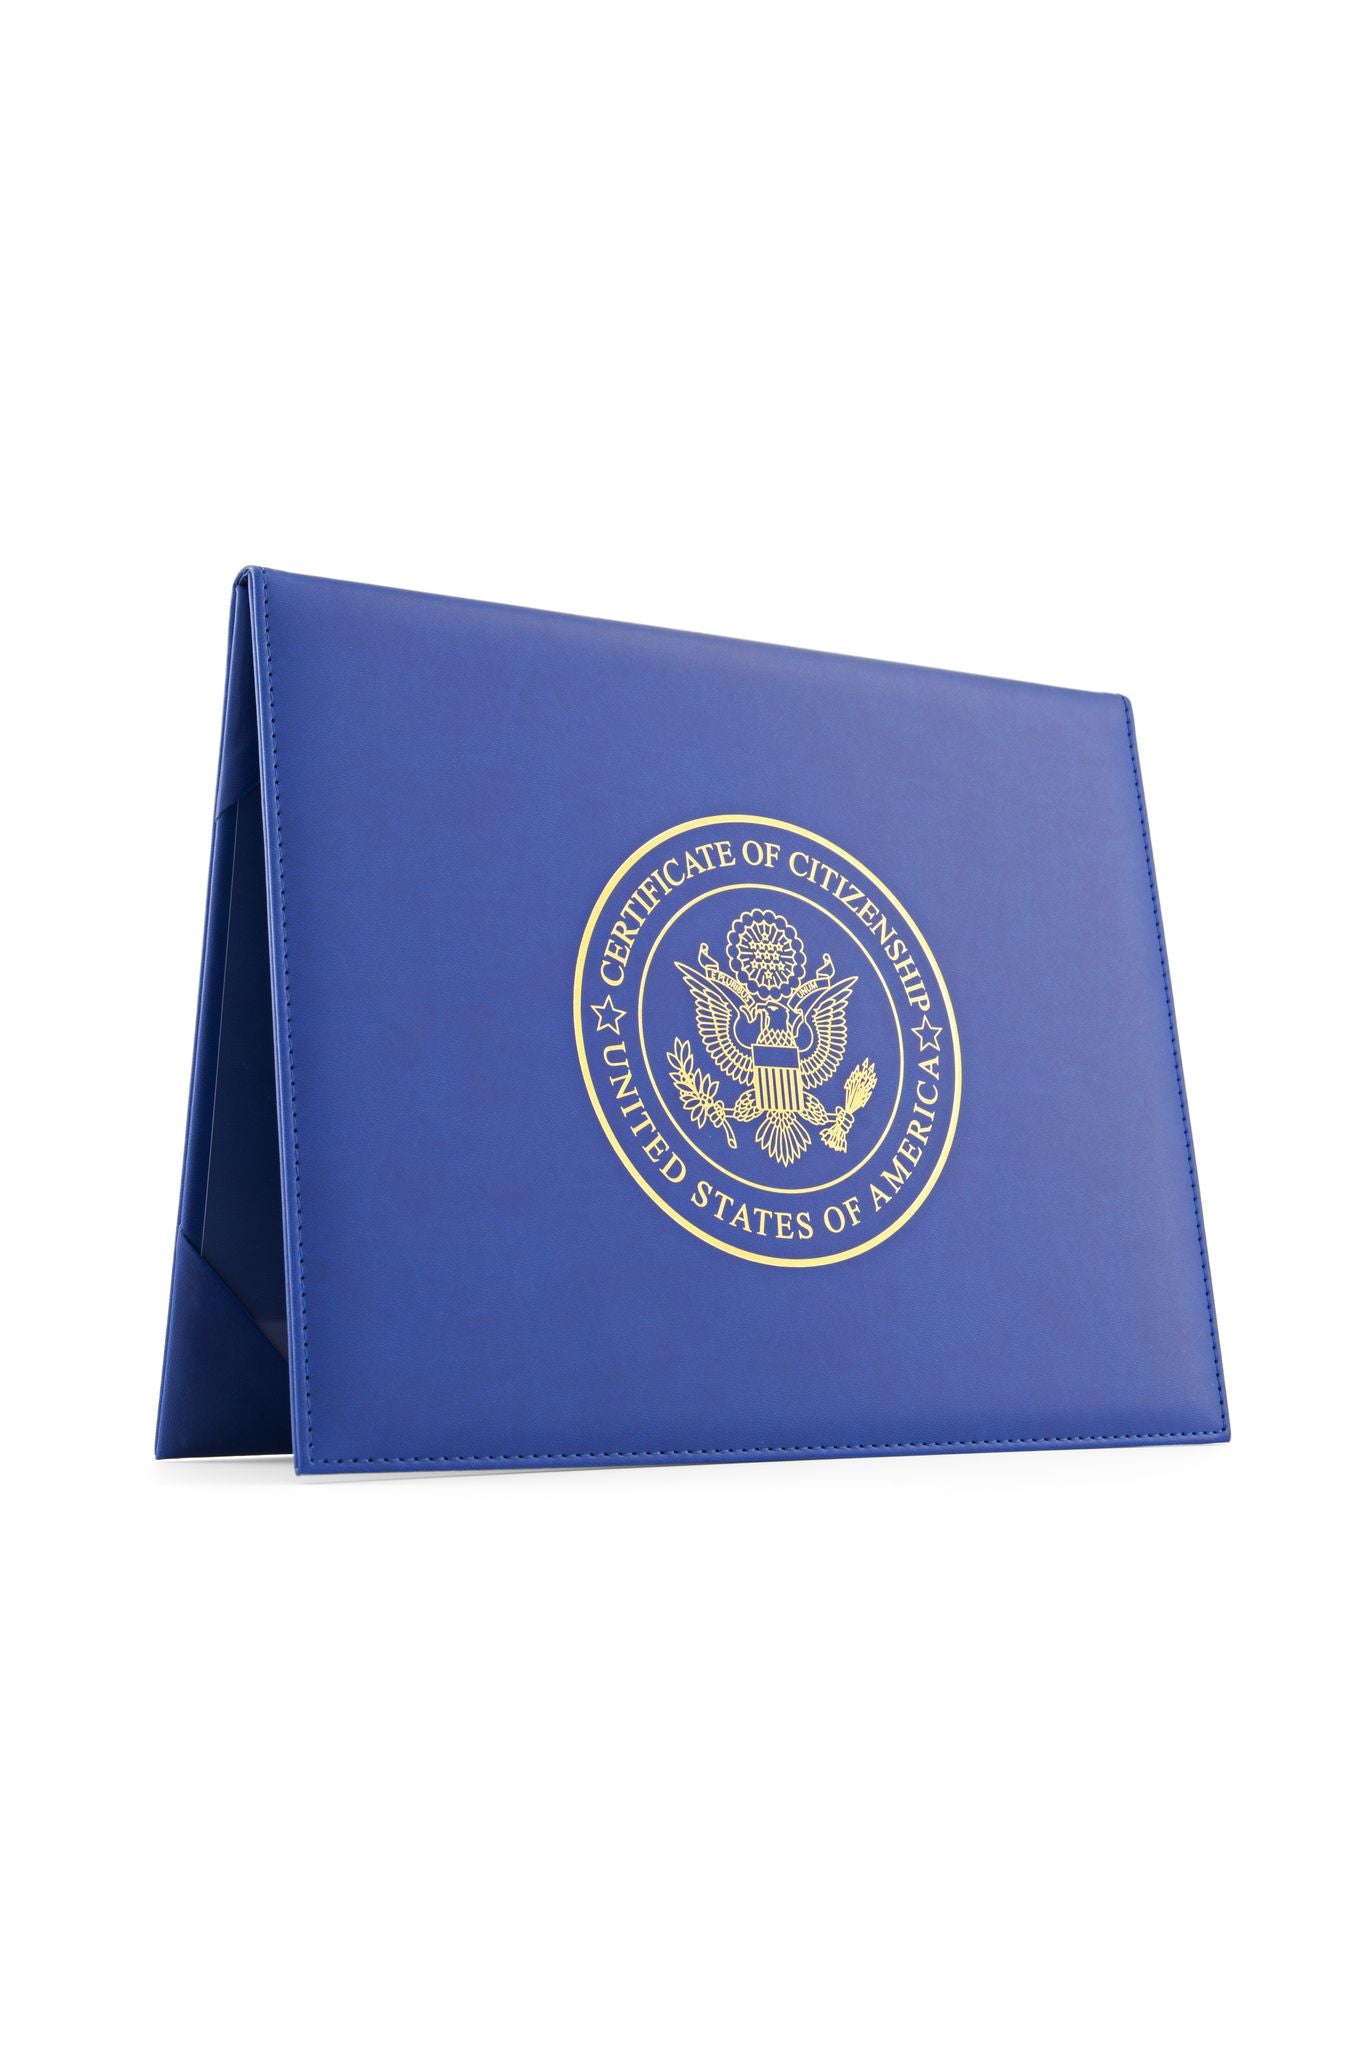 US Citizenship Certificate Holder - Gifts for New American Citizens